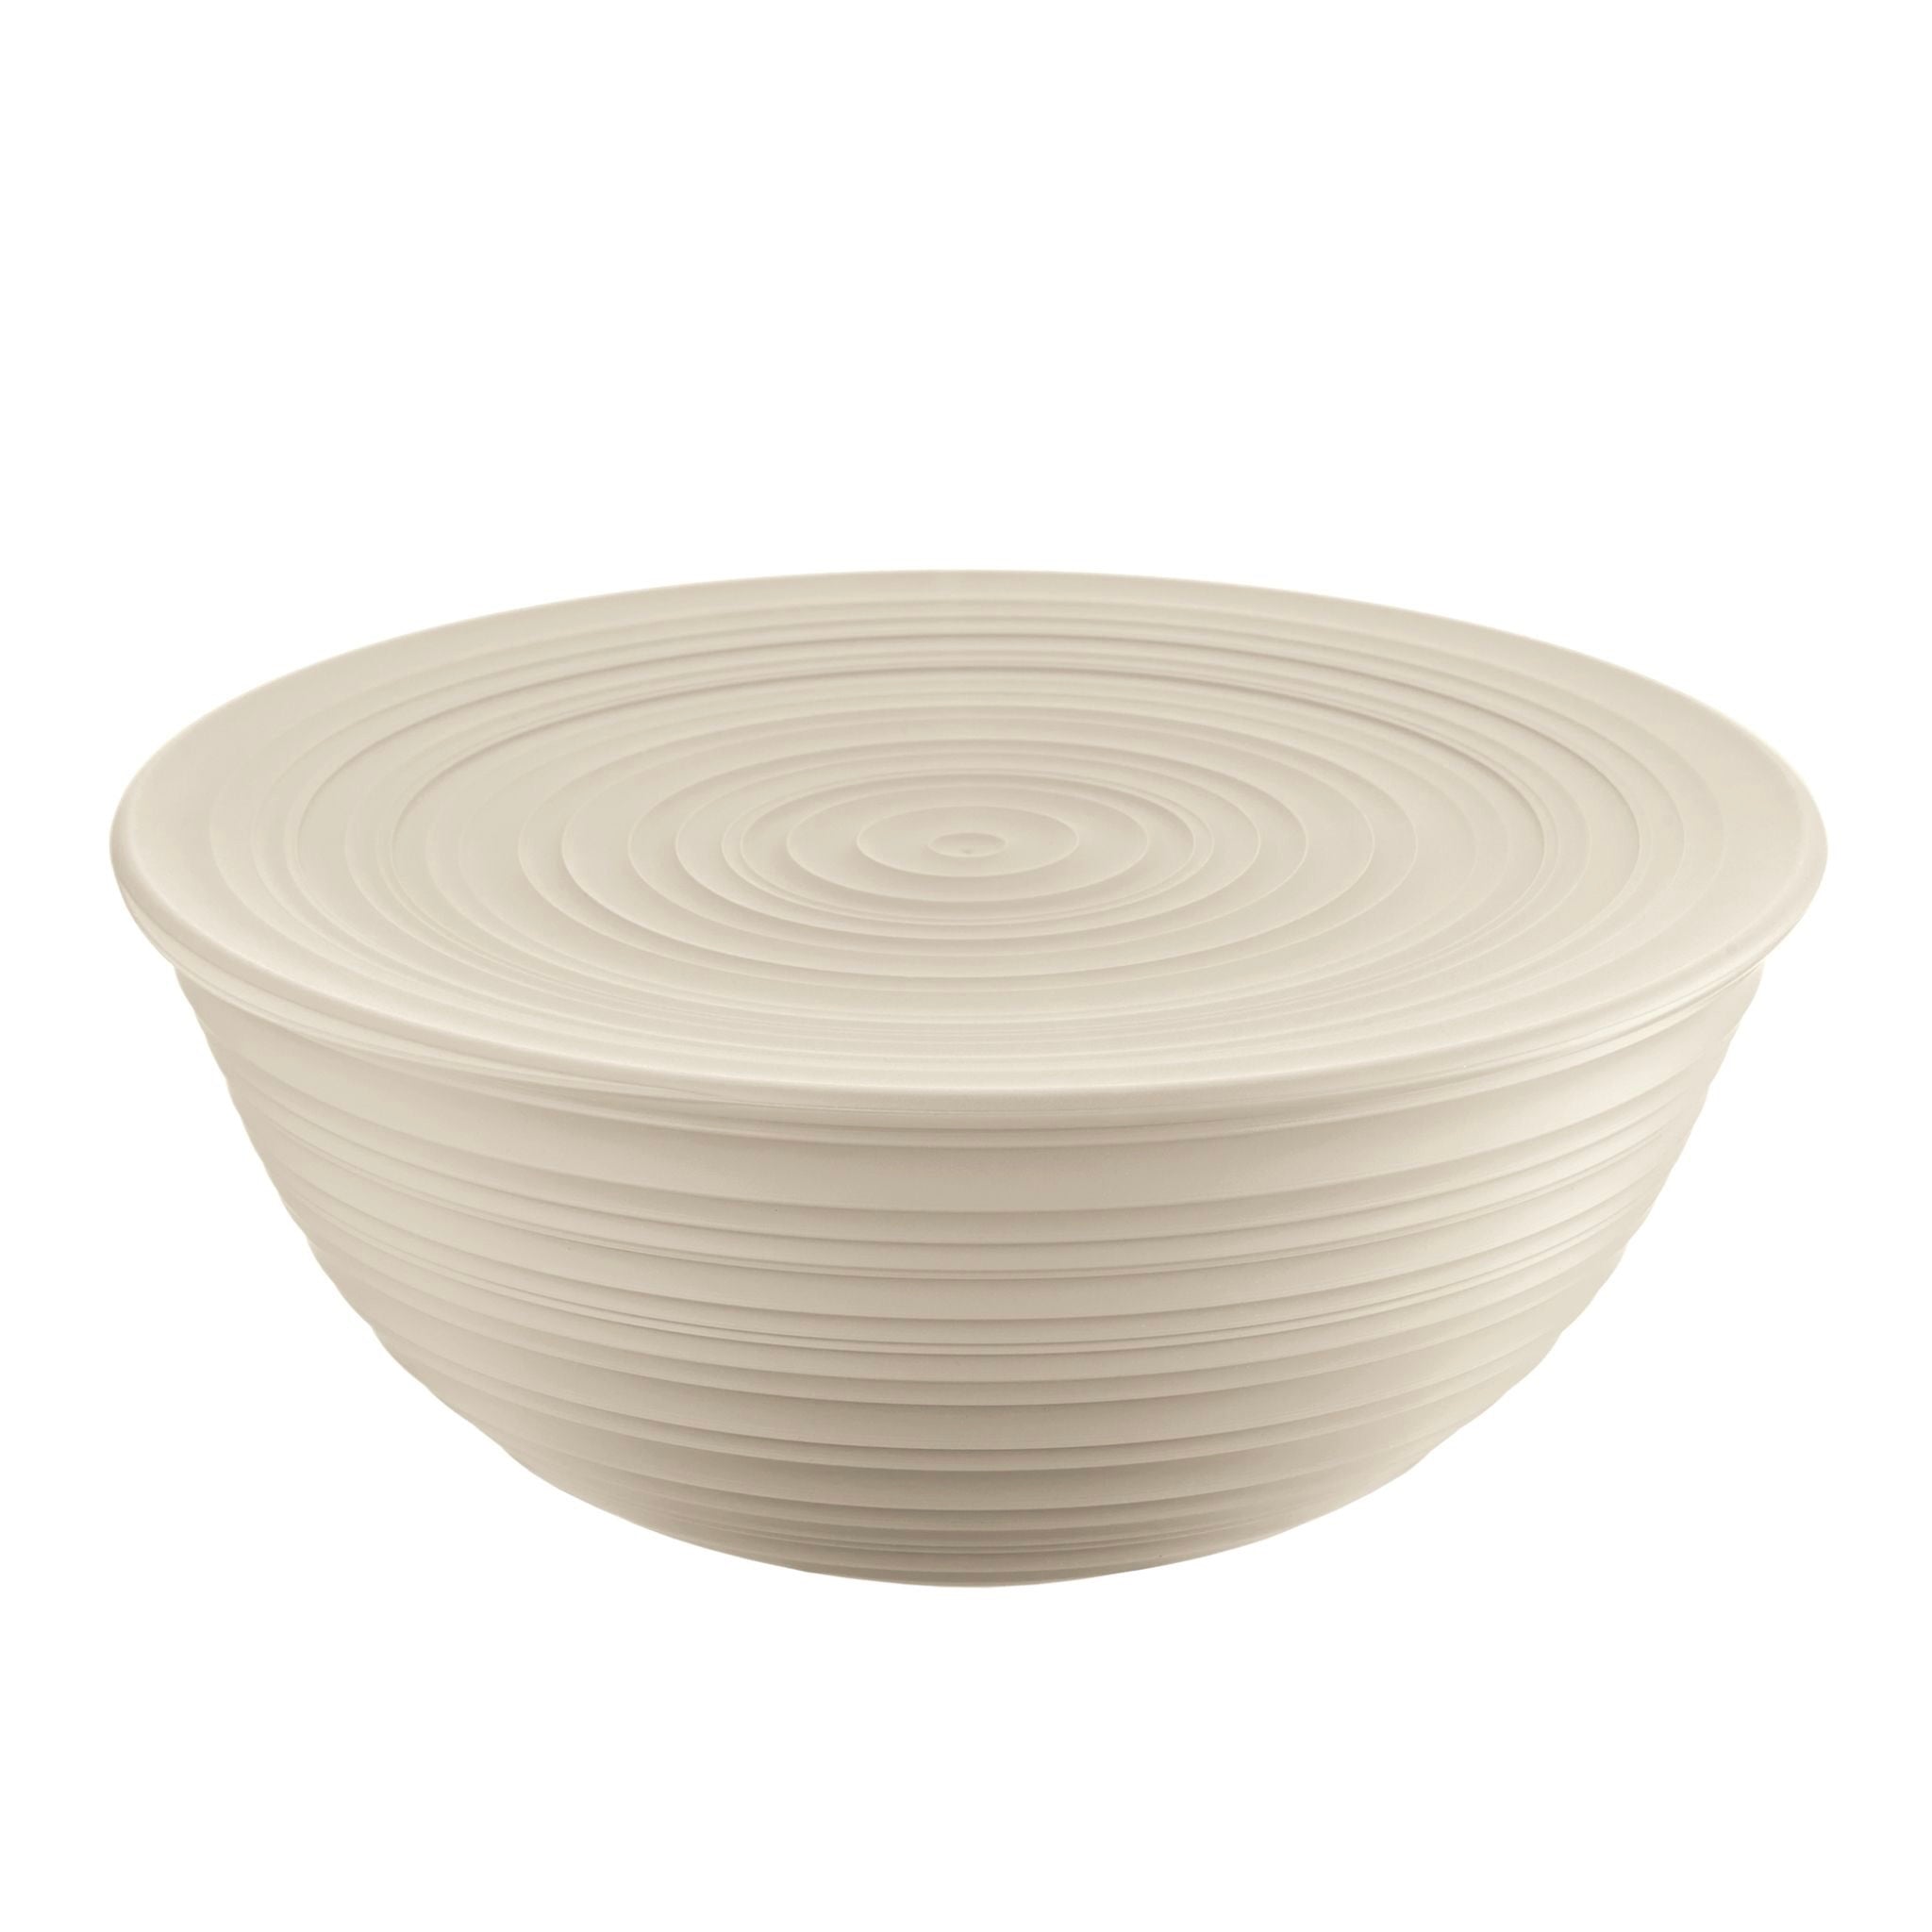 Clay Tierra Bowl with Lid by Guzzini - 3 sizes